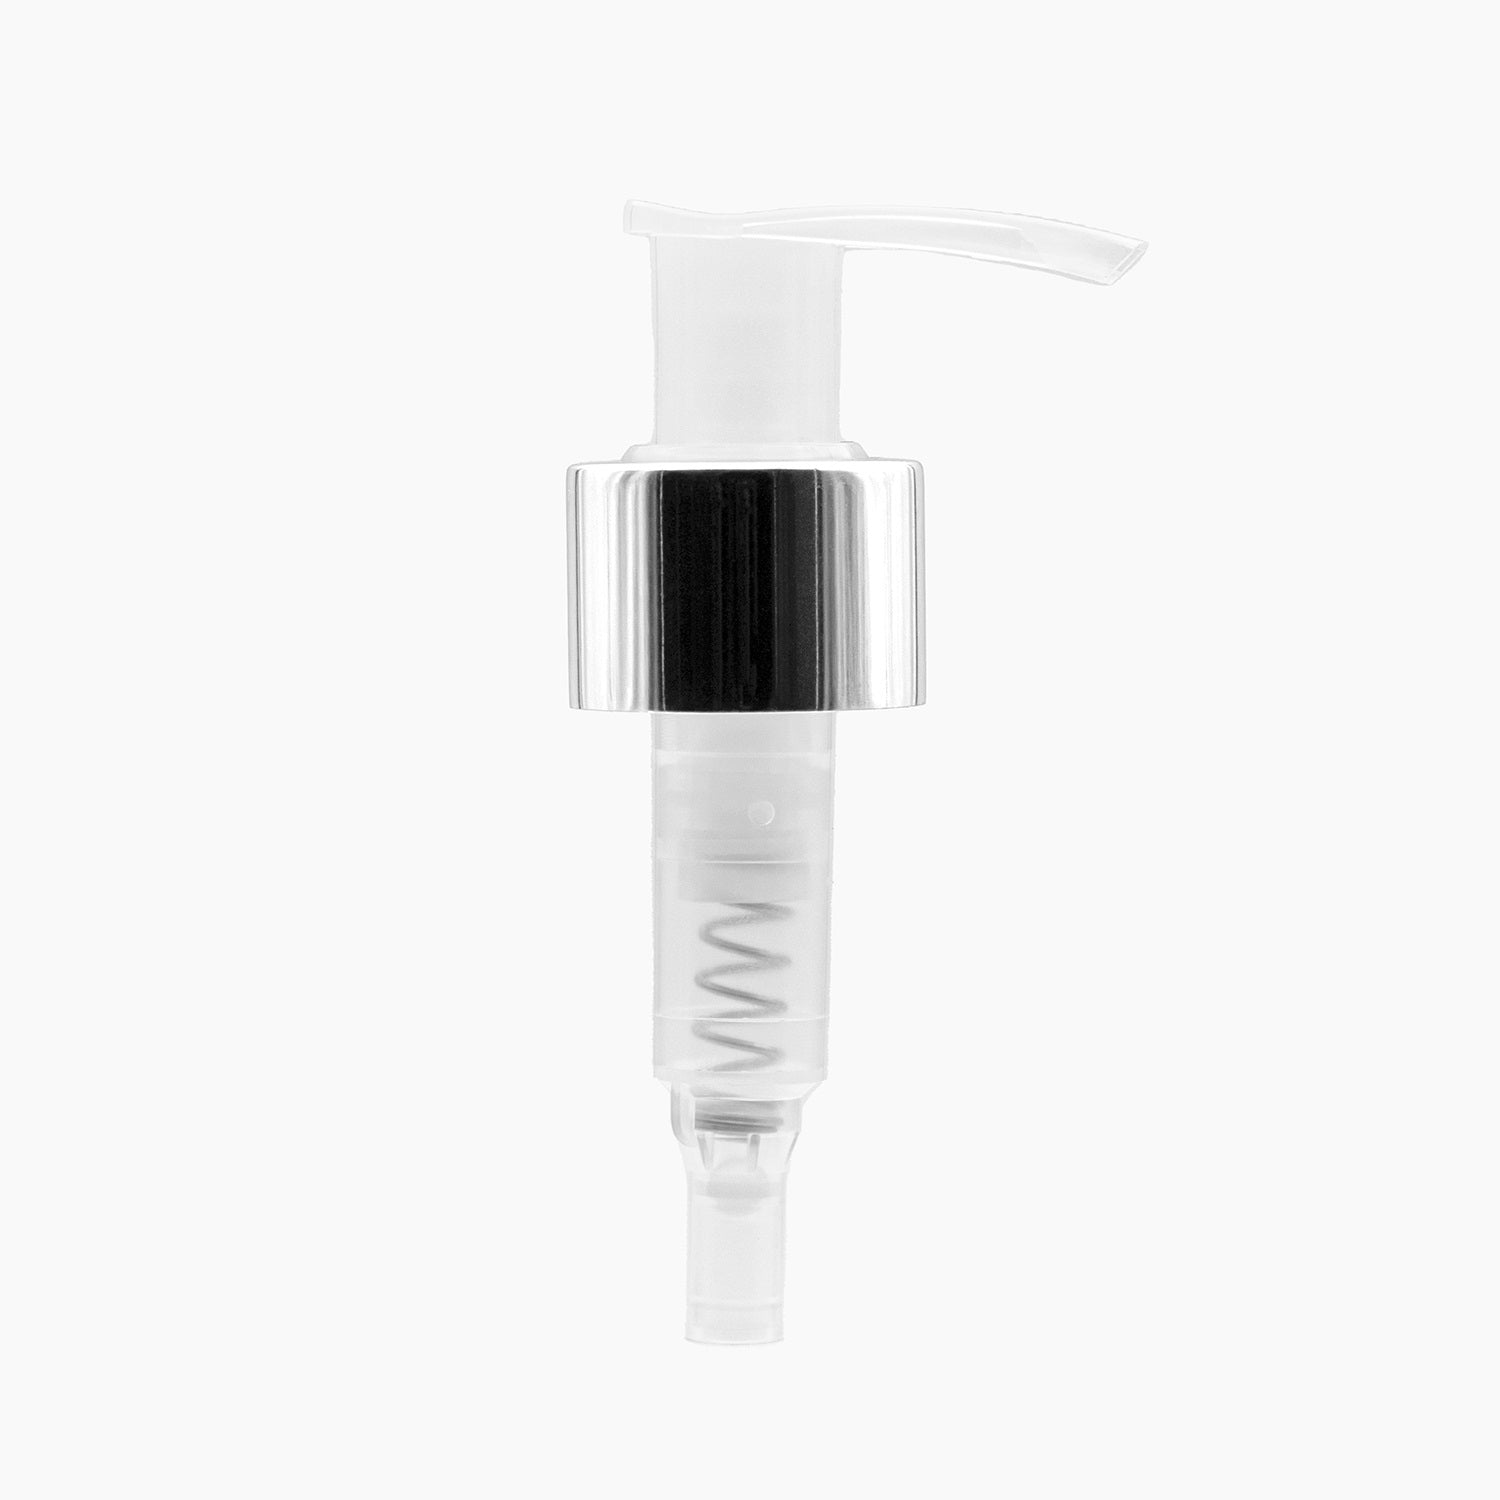 Silver Collar Natural 24mm Plastic Lotion Pump Cap On White Background | Brightpack Closures And Accessories